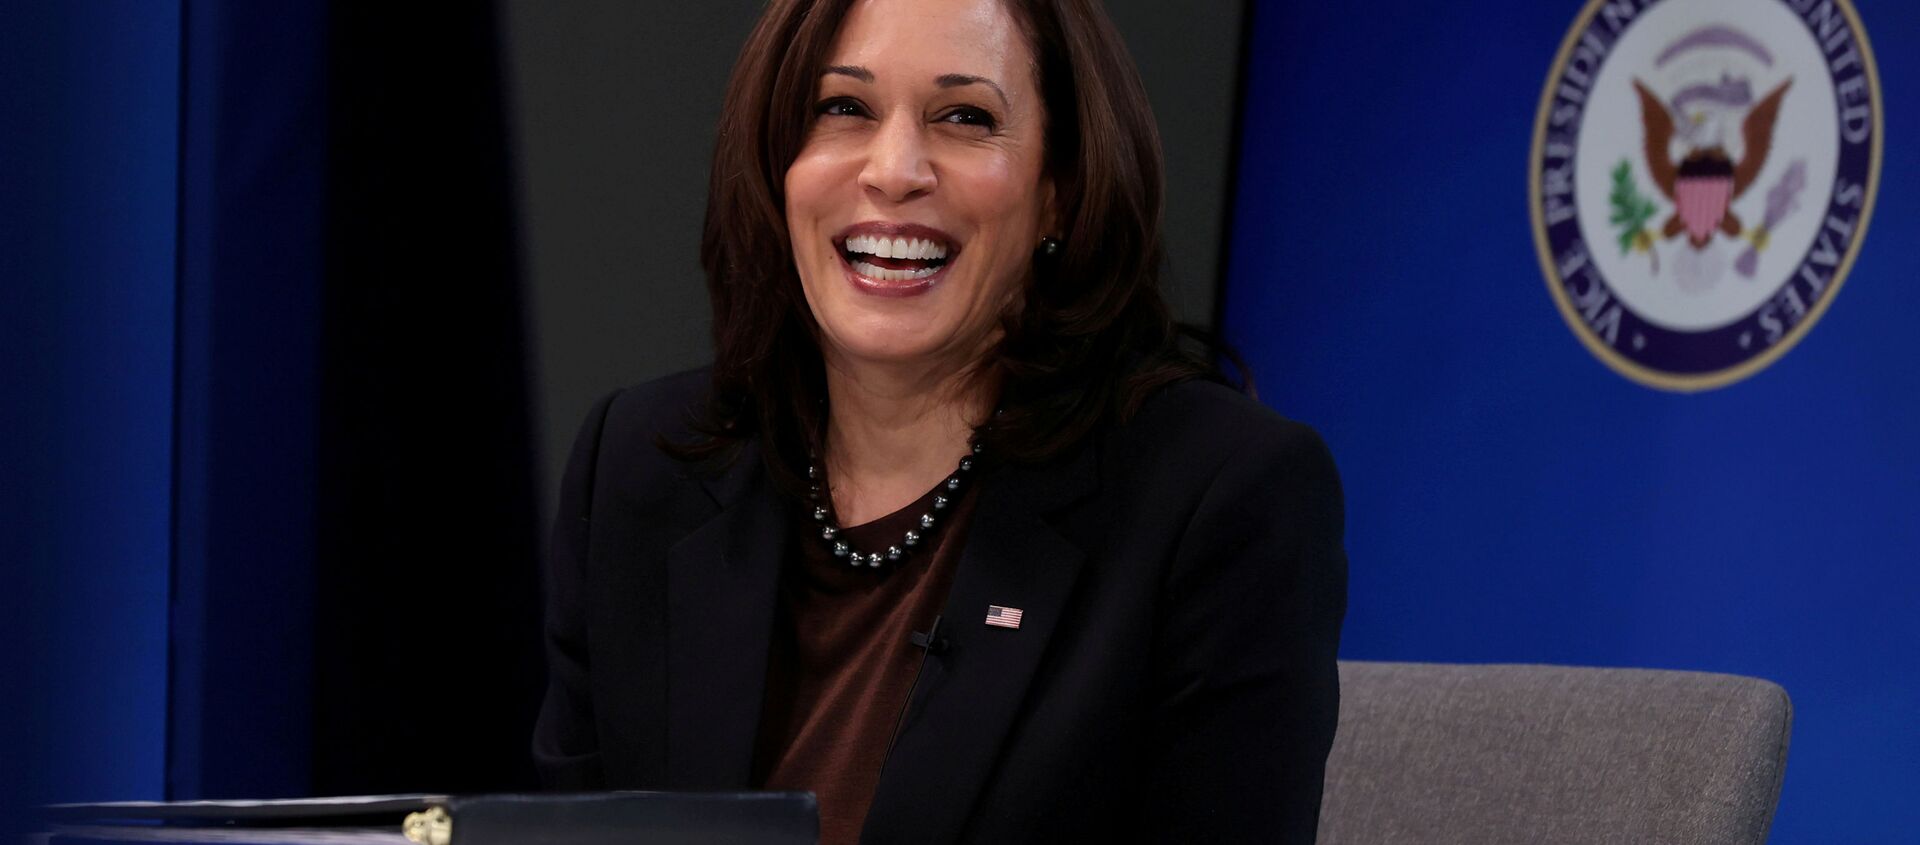 U.S. Vice President Kamala Harris‬ smiles after delivering a keynote address to the House Democratic Caucus virtually on camera from the Eisenhower Executive Office Building at the White House in Washington, U.S. March 2, 2021 - Sputnik International, 1920, 26.06.2021